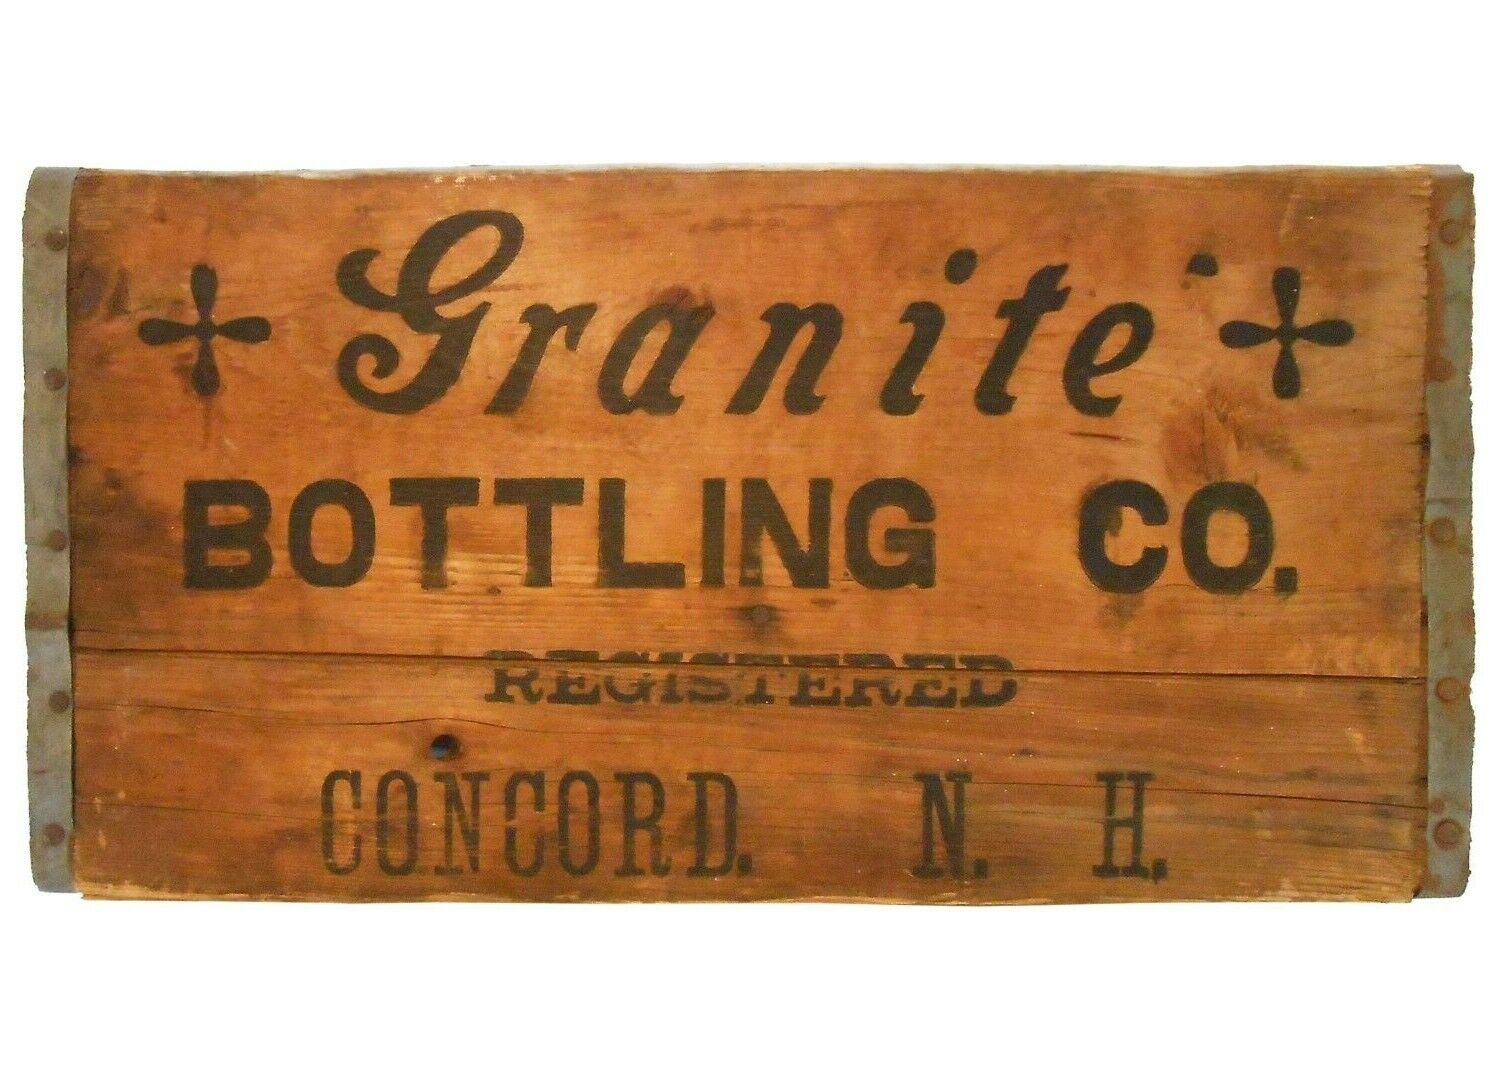 RARE GRANITE BOTTLING CO CONCORD NH ANTIQUE INK STMPD WOOD BOX SODA ADVRT. CRATE